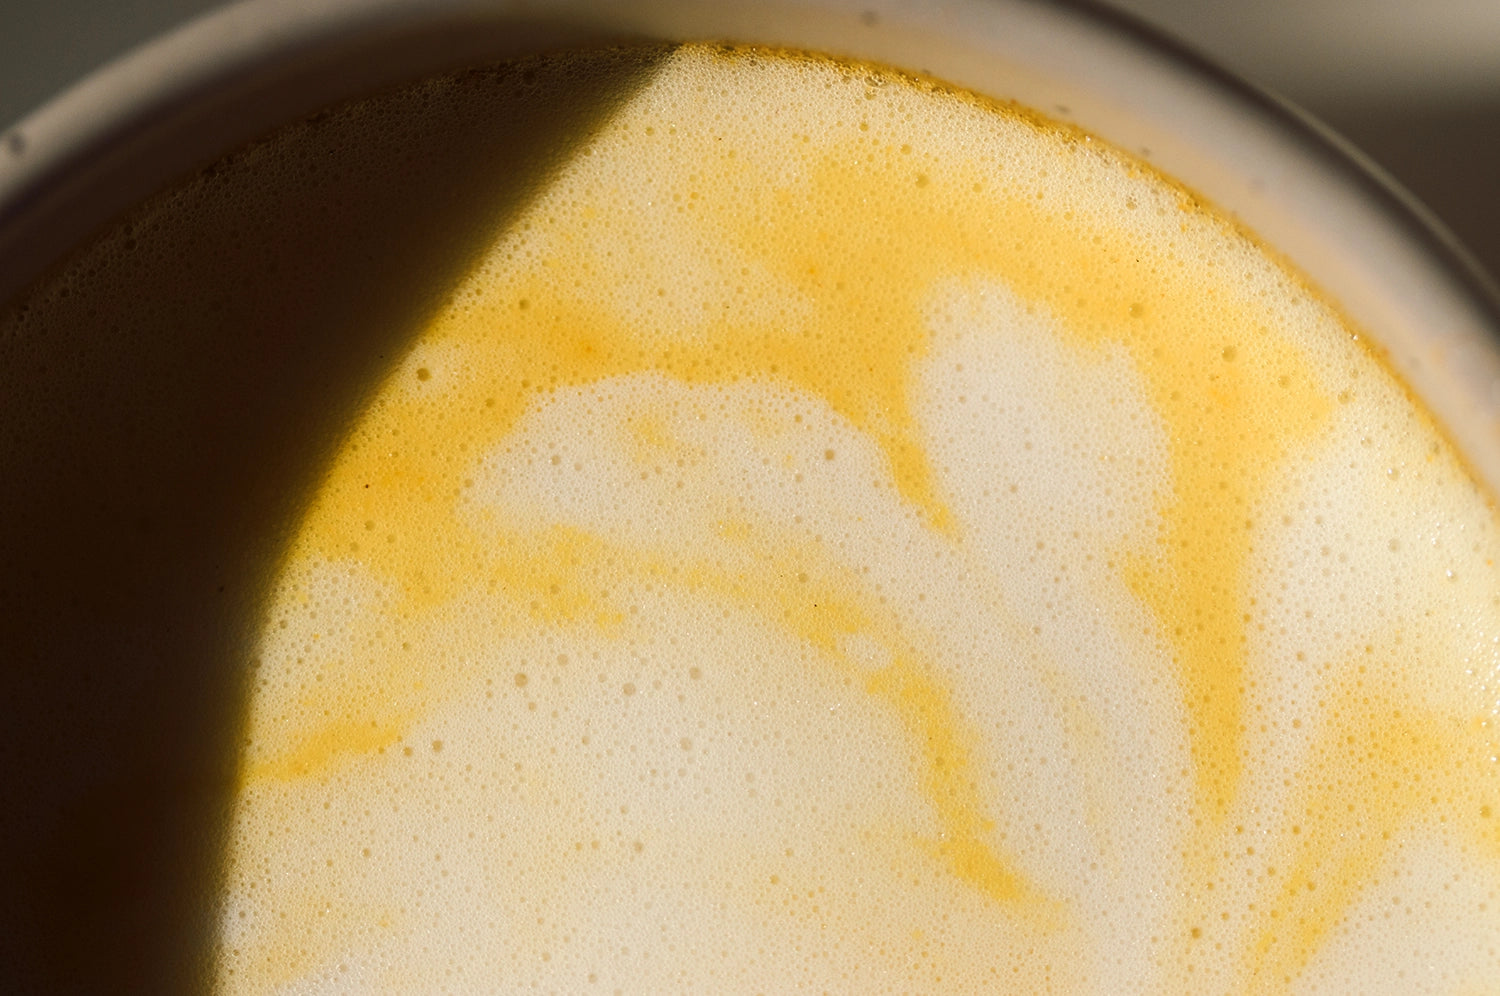 A cup of THE FULLEST's Warm Feelings saffron latte prepared with steamed milk in a ceramic mug.